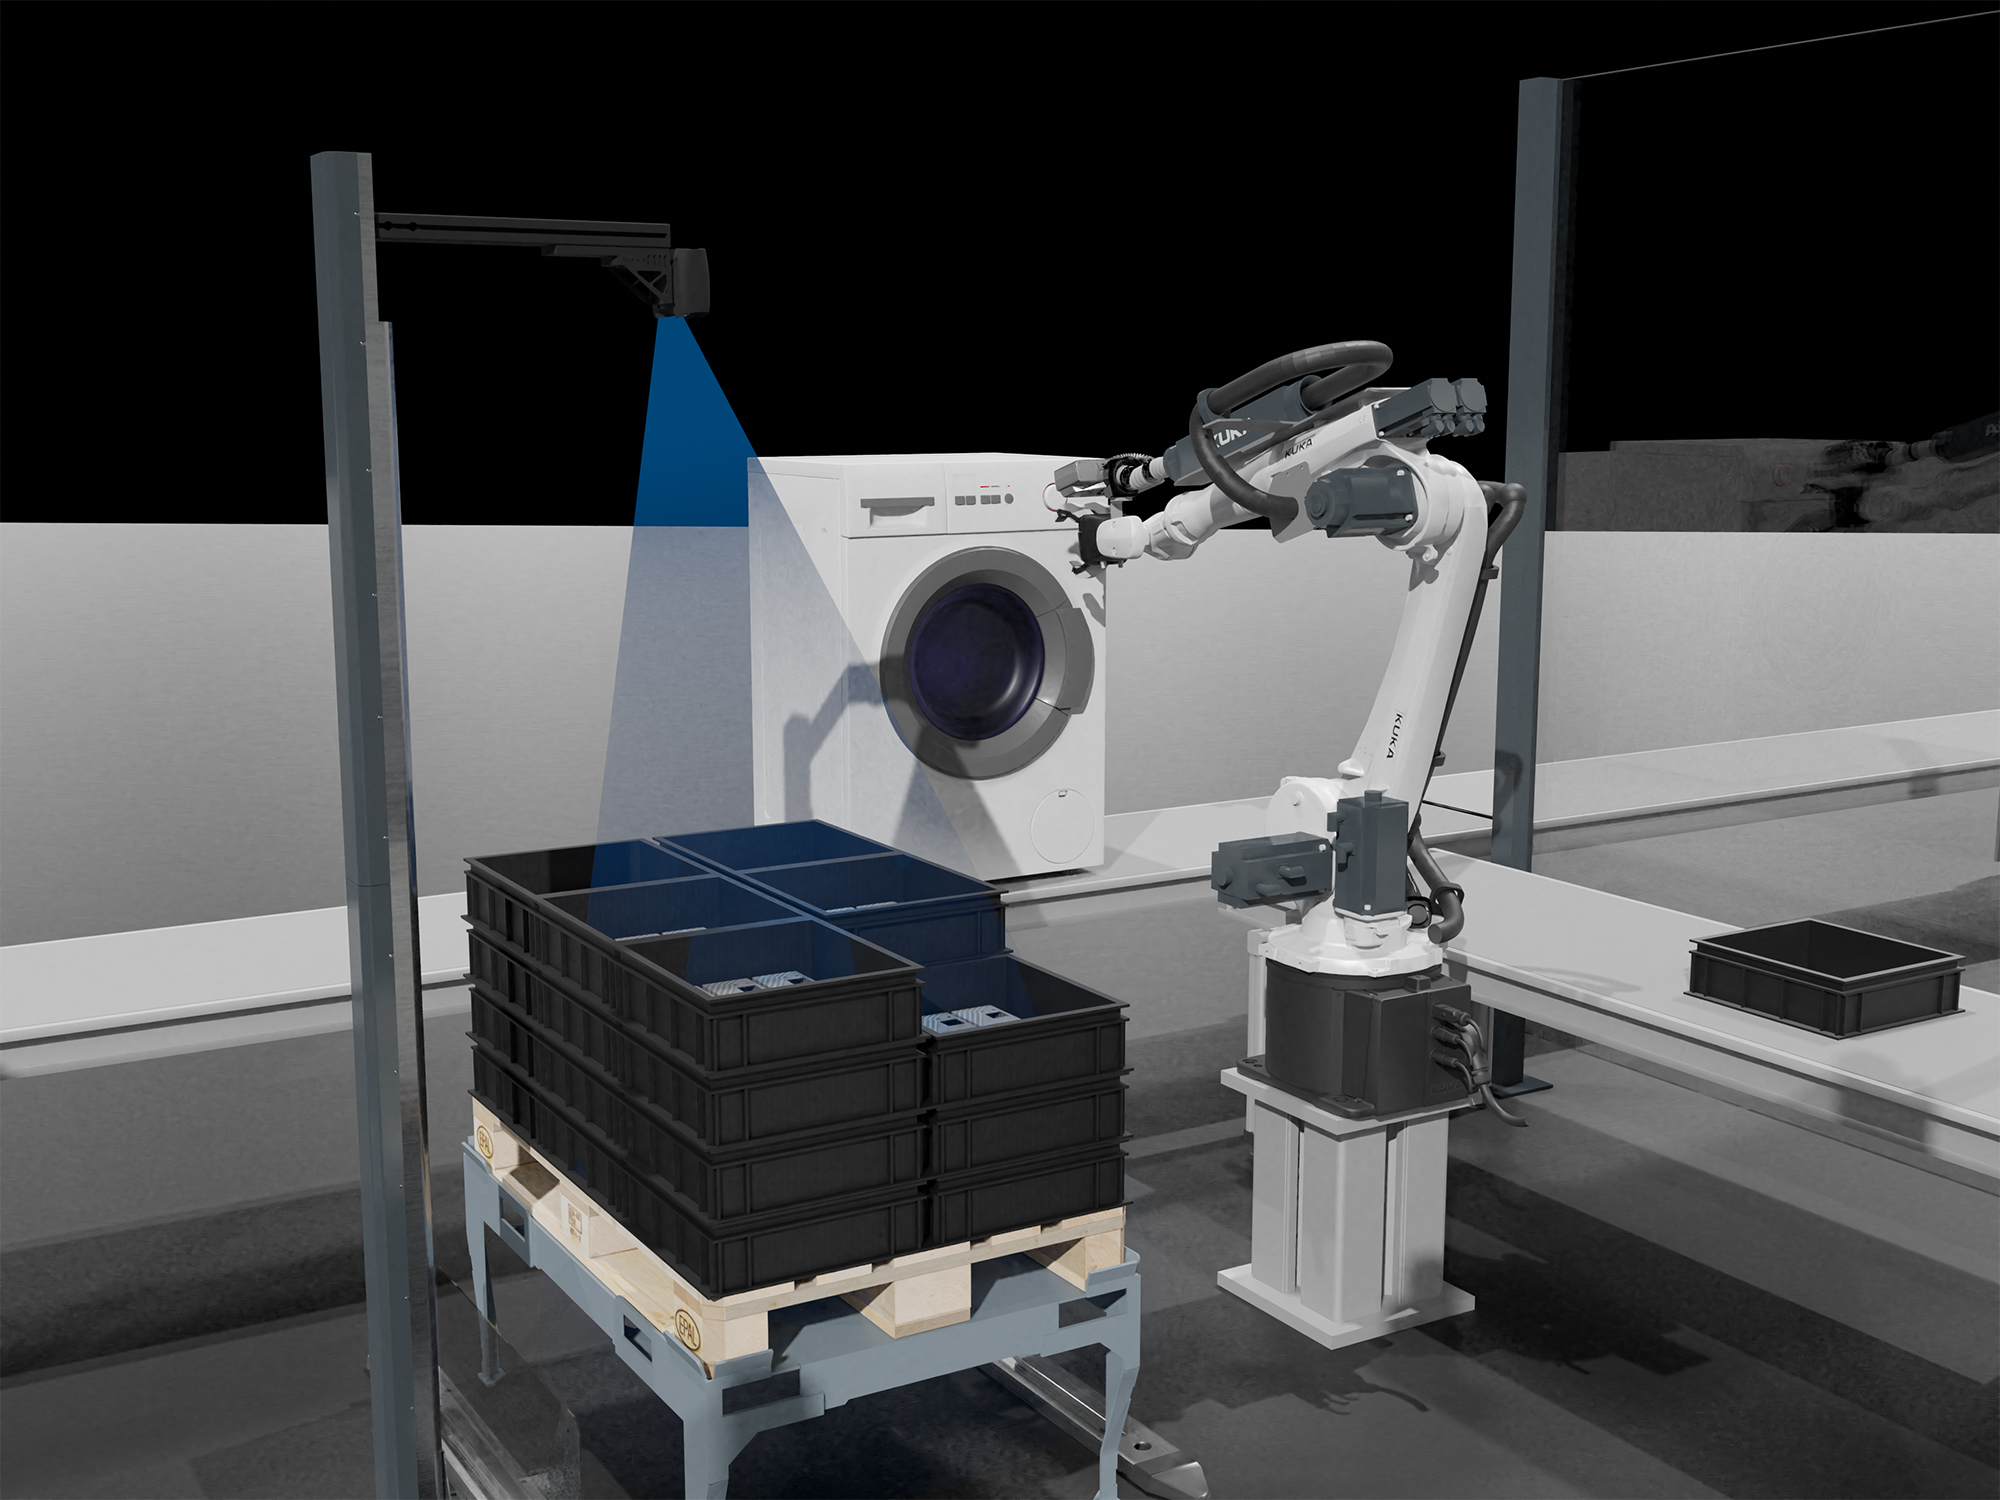 Control assembly units and robots with inos’ 2D and 3D position recognition systems